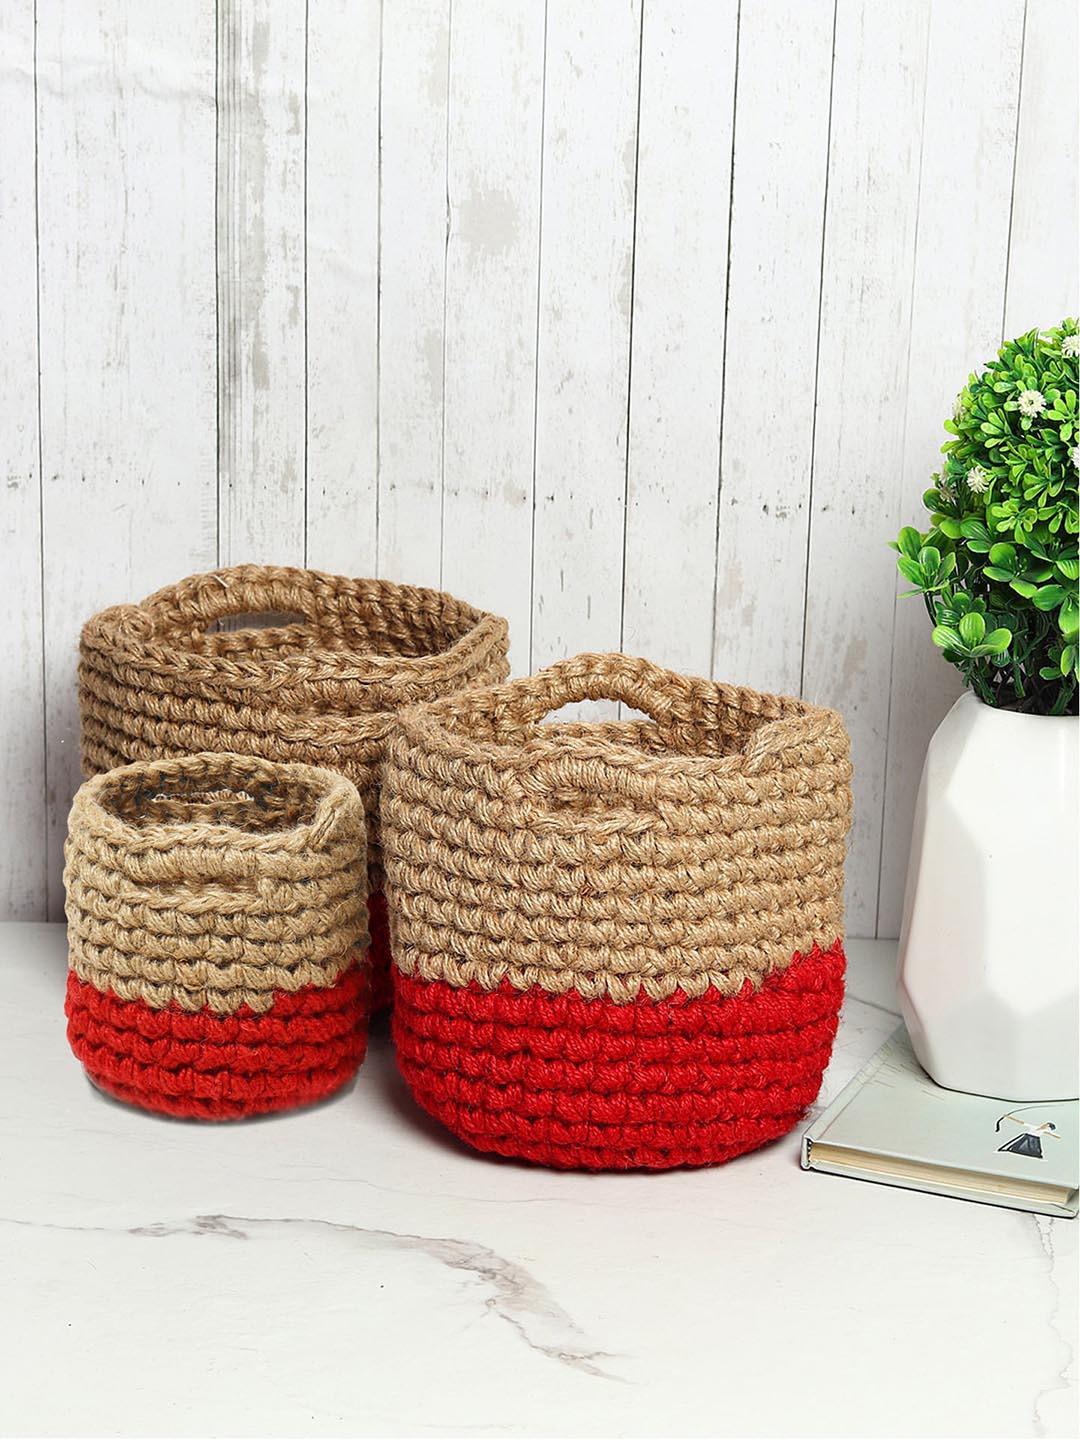 Beige and Red Set of 3 Color blocked Jute Crochet Baskets